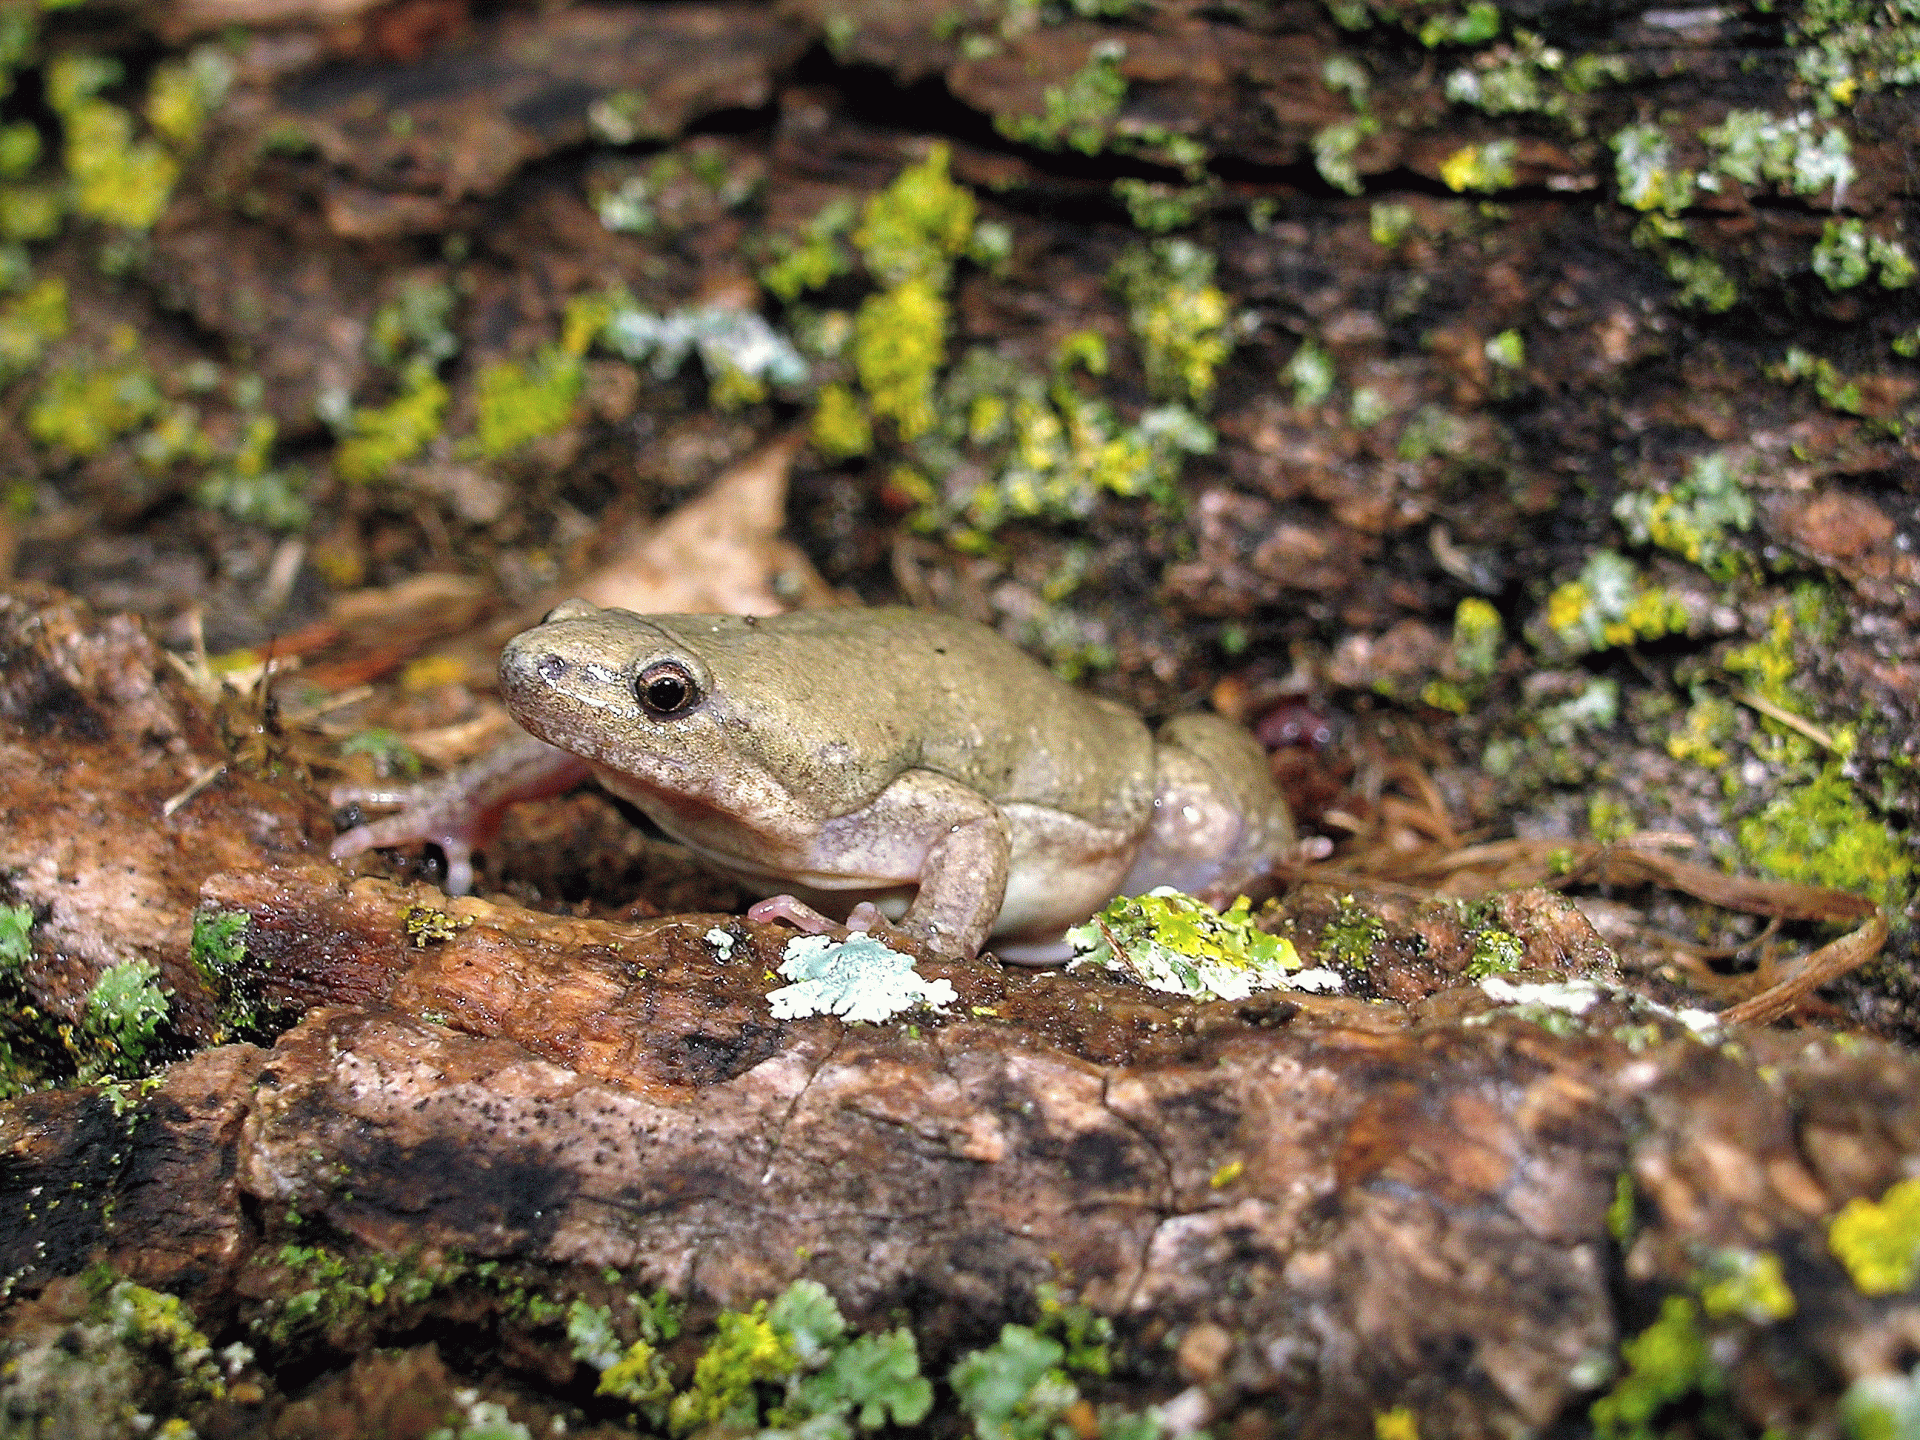 WesternNarrow-mouthedToad